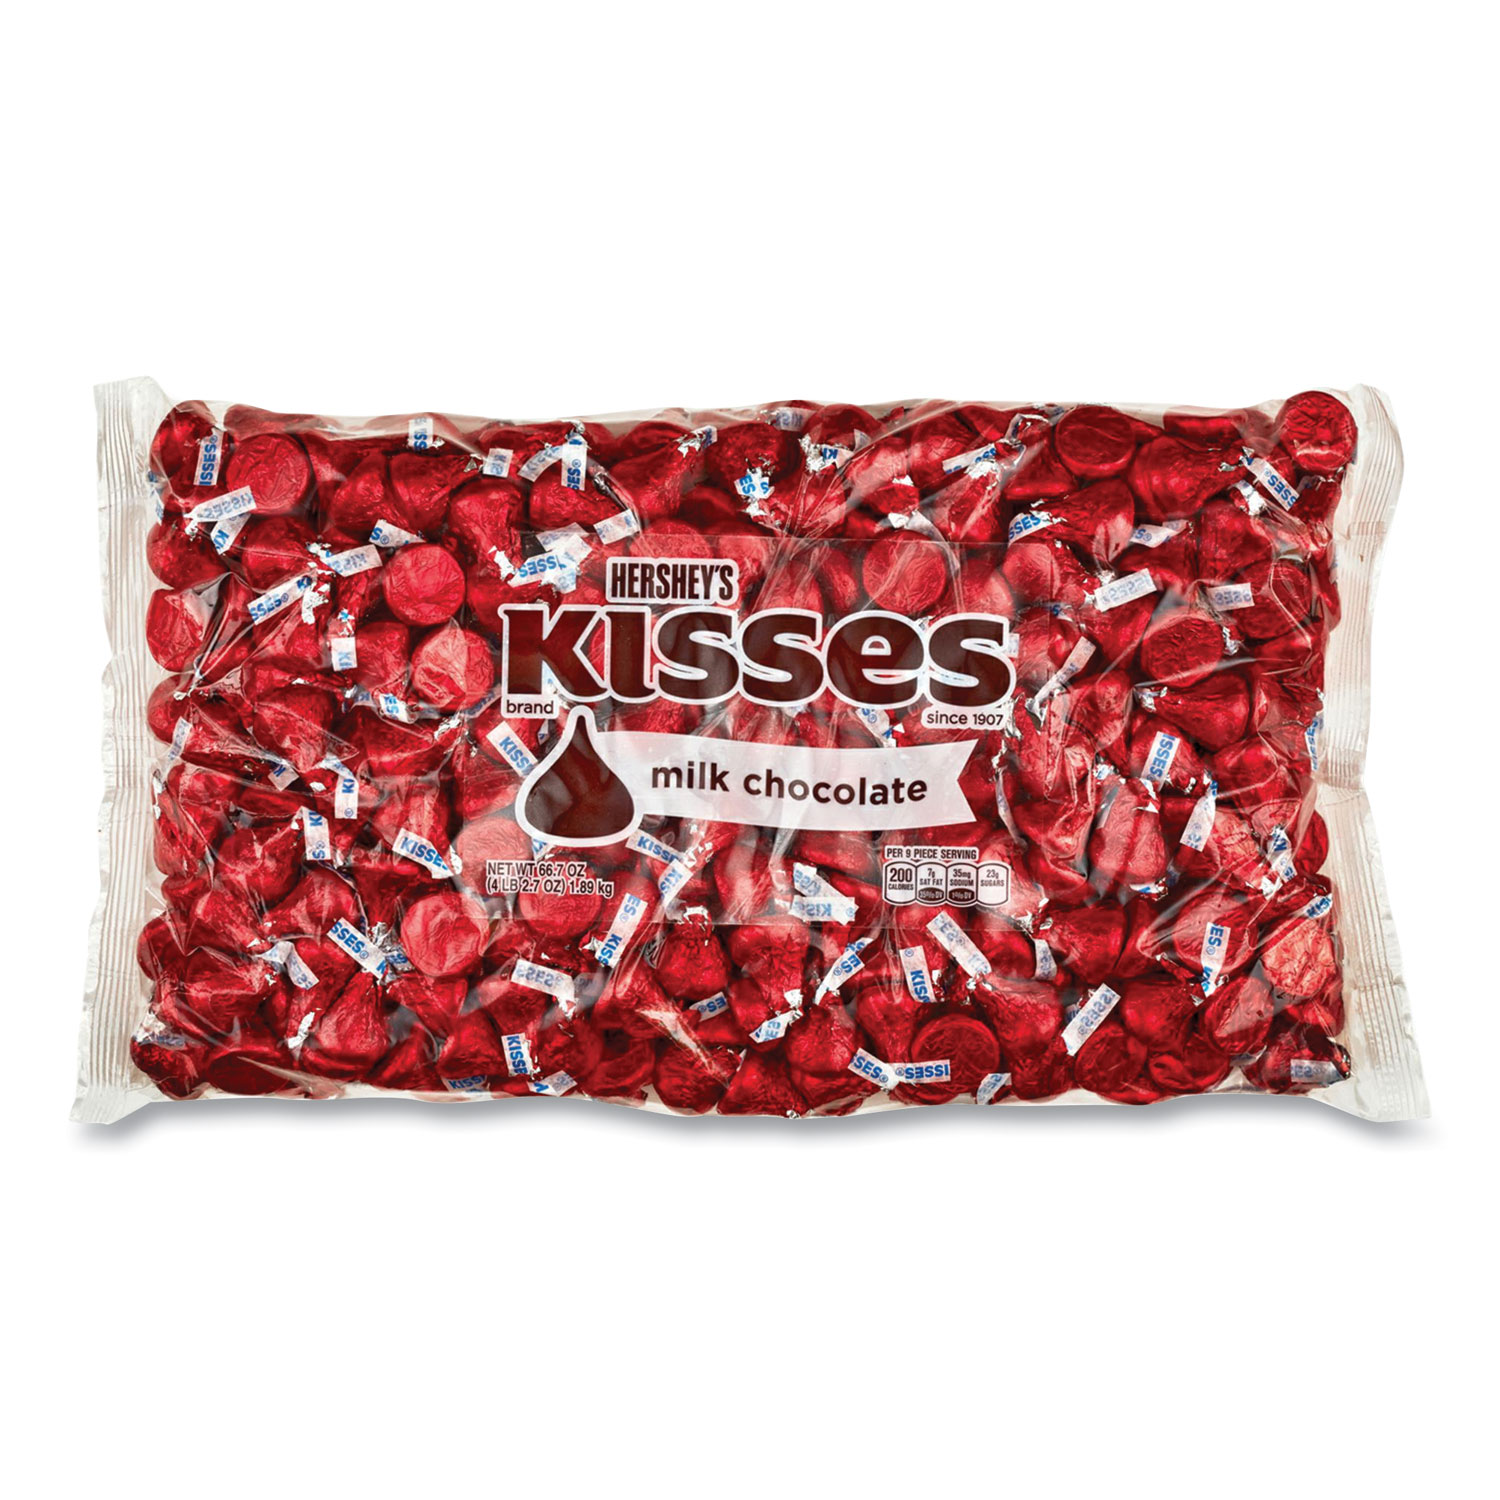  Hershey's 16028 KISSES, Milk Chocolate, Red Wrappers, 66.7 oz Bag, Free Delivery in 1-4 Business Days (GRR24600083) 